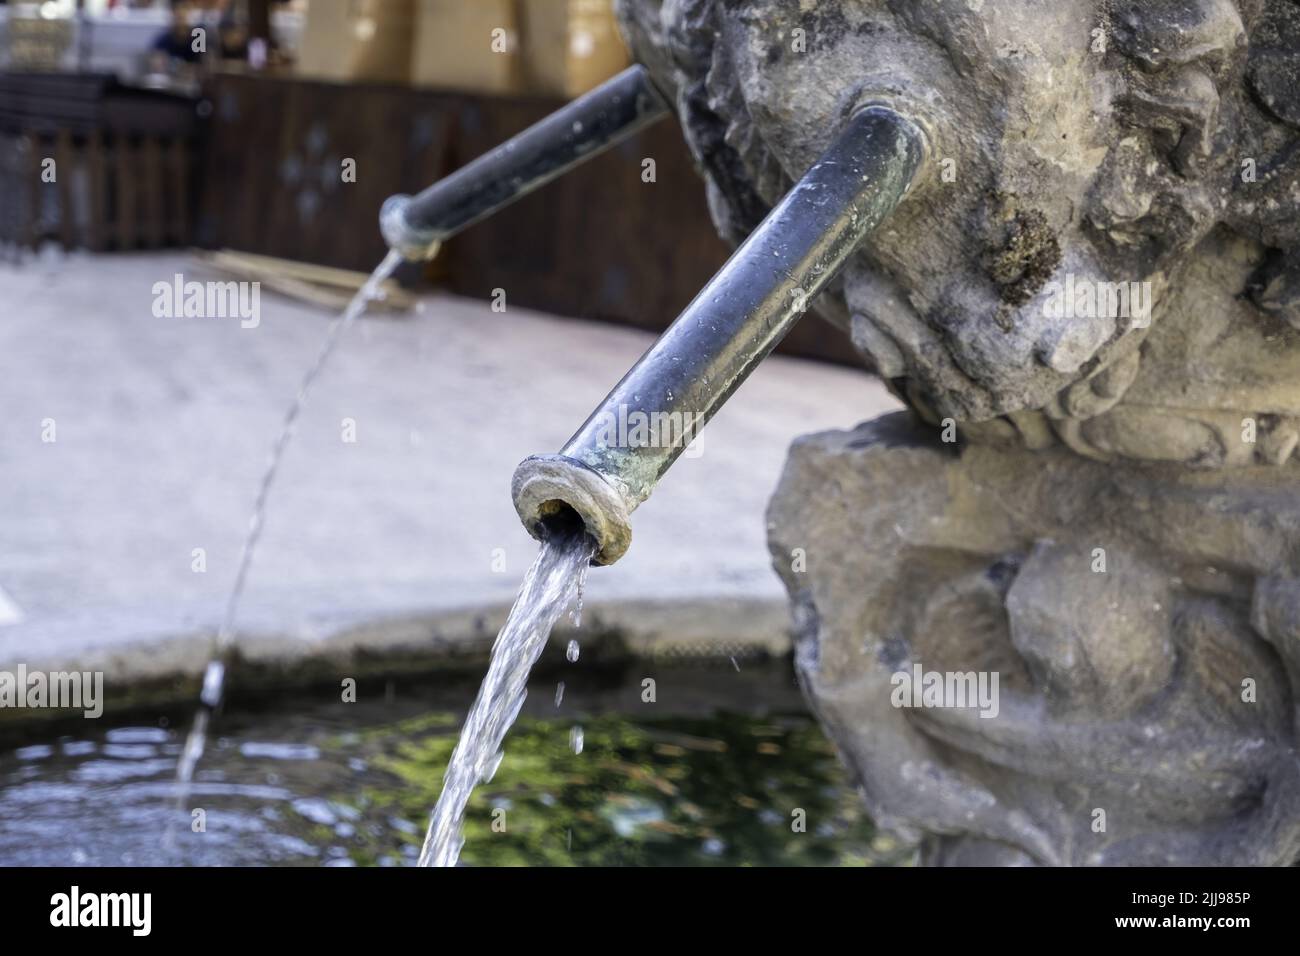 Old stone fountain in the city, decoration with water Stock Photo